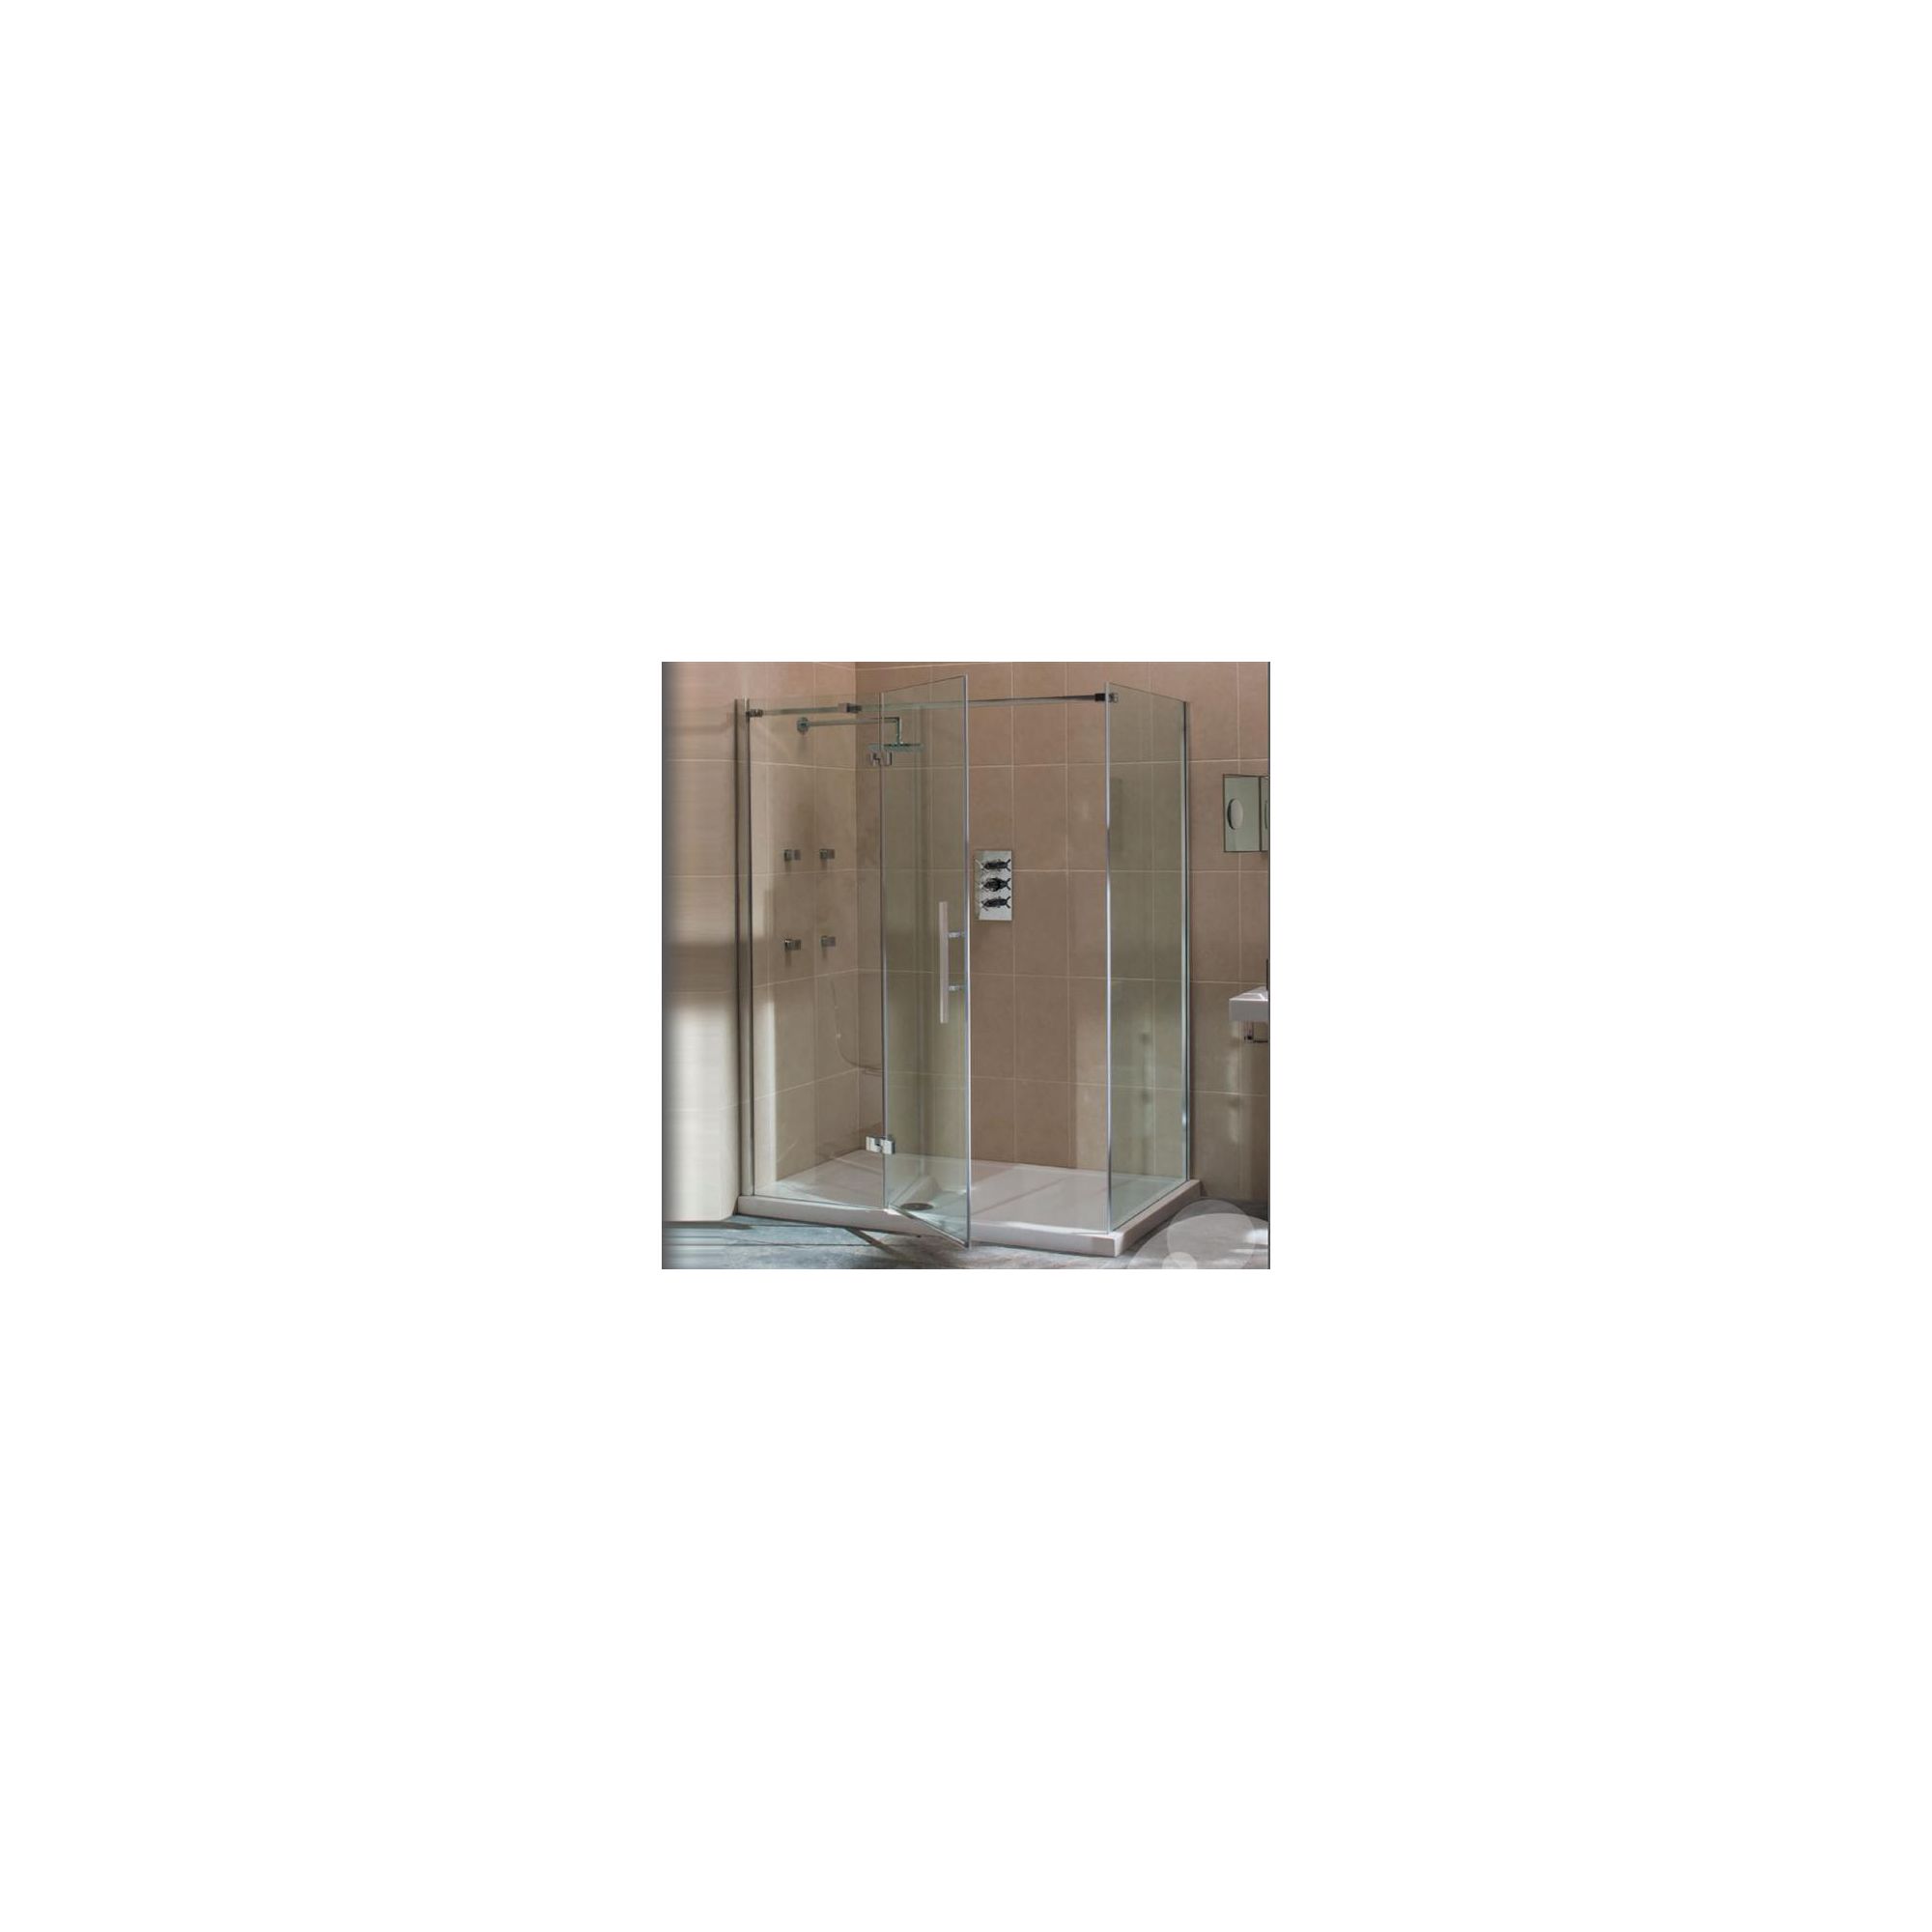 Merlyn Vivid Nine Hinged Door Shower Enclosure with Inline Panel, 1100mm x 800mm, Left Handed, Low Profile Tray, 8mm Glass at Tesco Direct